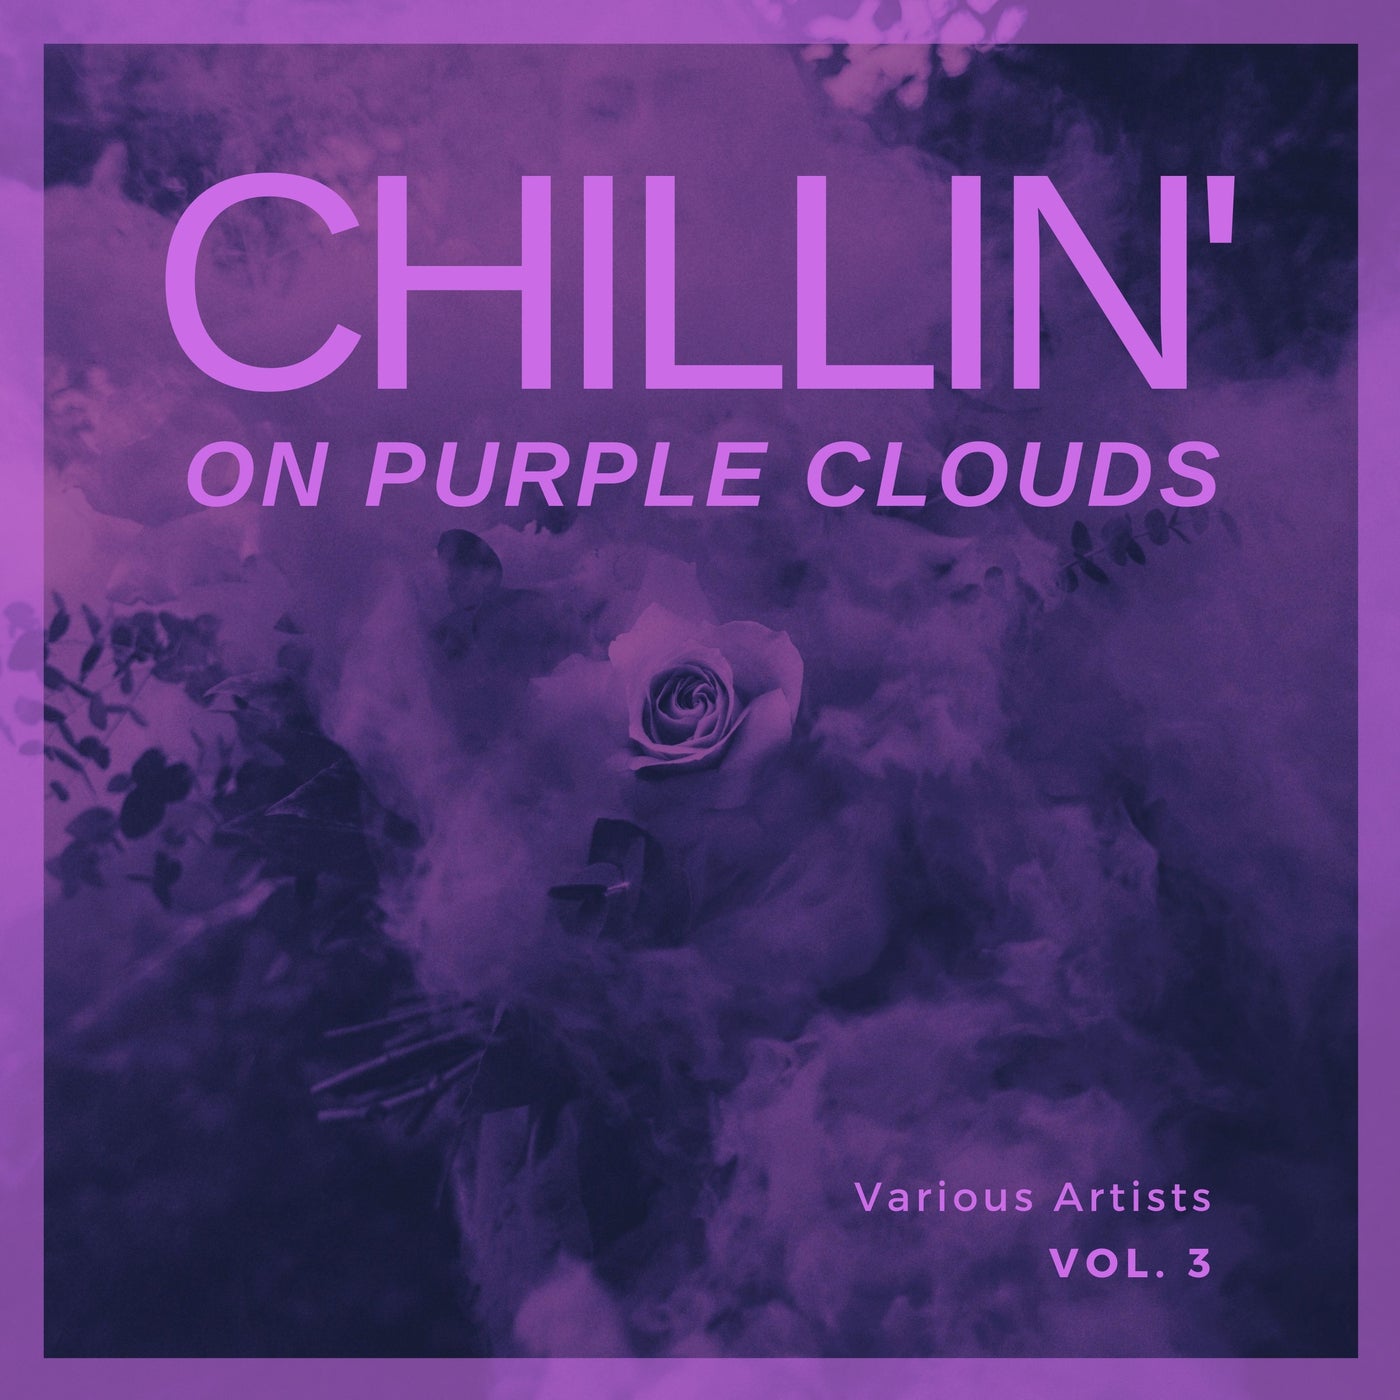 Chilling On Purple Clouds, Vol. 3